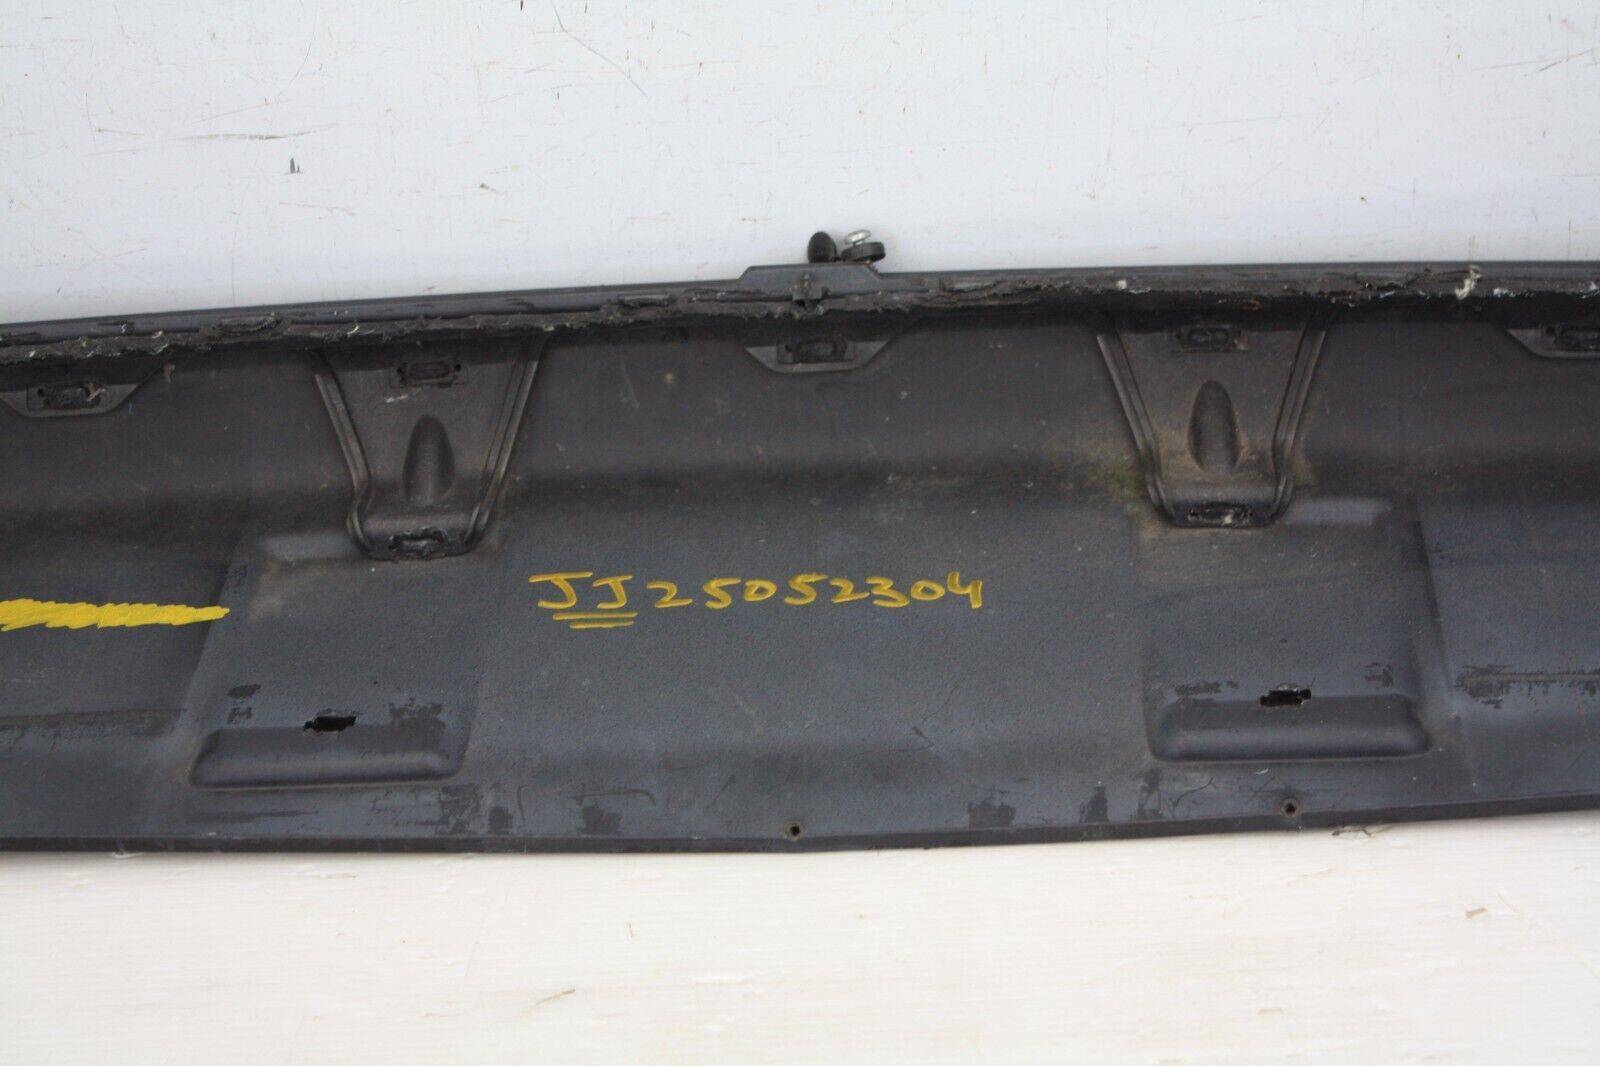 Range-Rover-Autobiography-Front-Bumper-Lower-Section-BH4M-17F021-A-SEE-PICS-175744651531-15